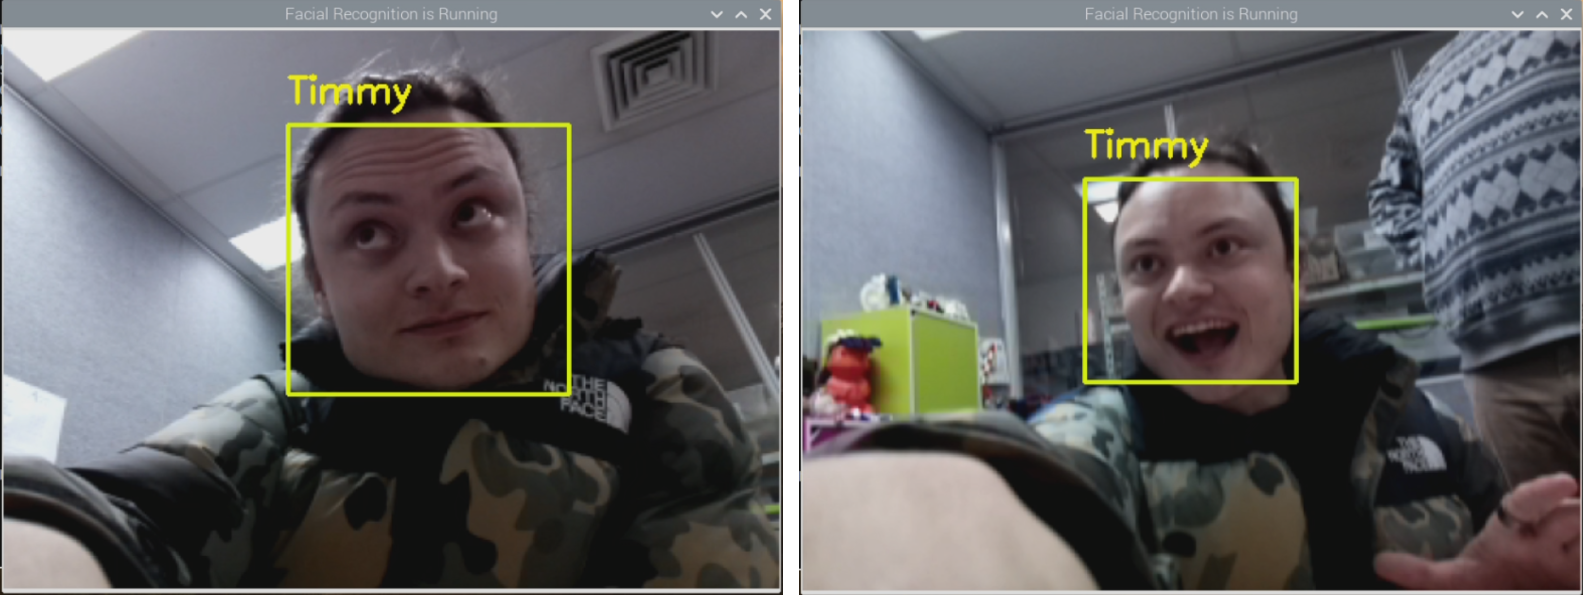 Face Recognition With Raspberry Pi And OpenCV Tutorial Australia